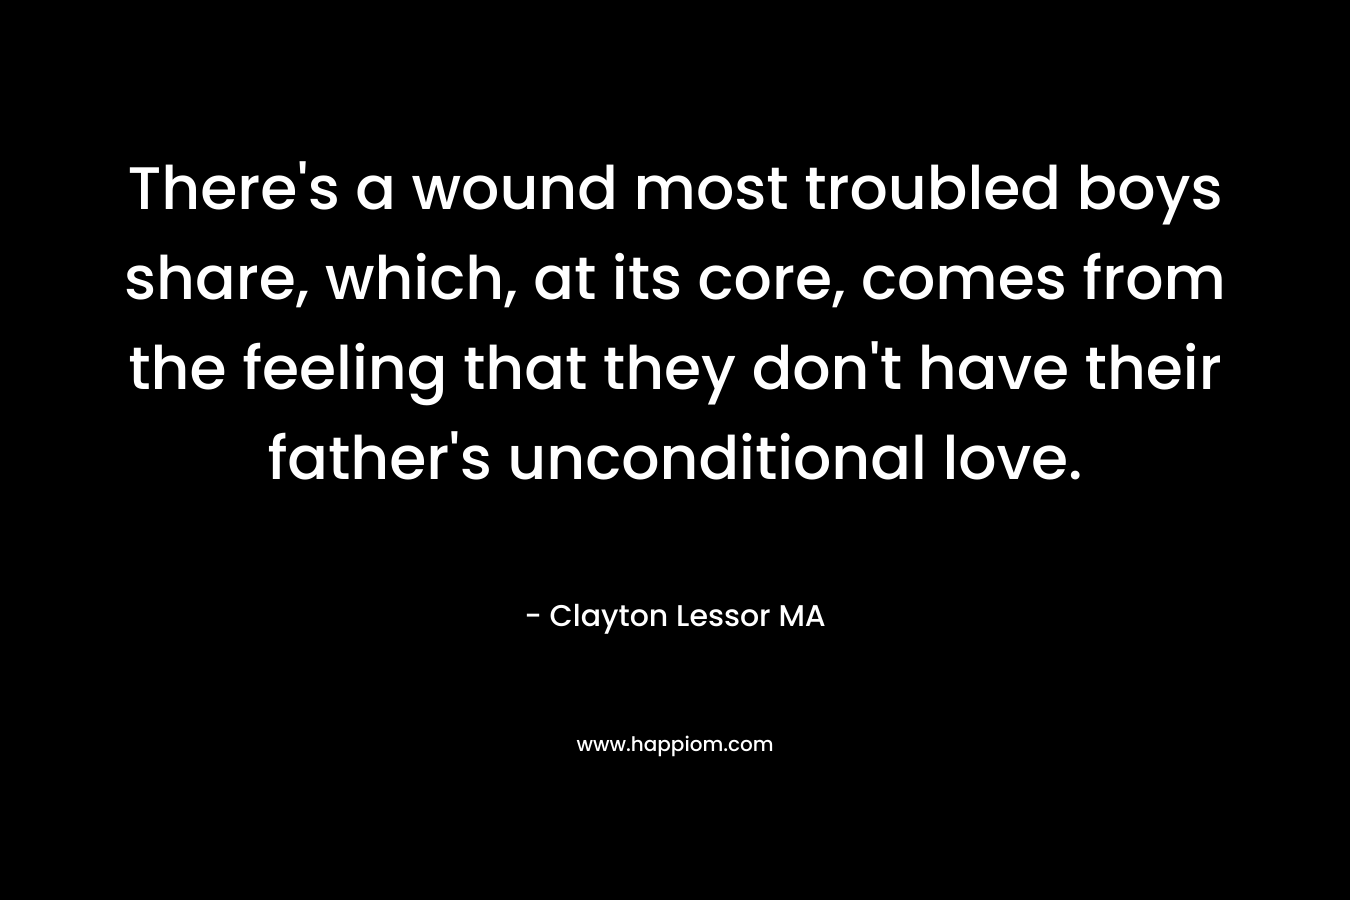 There’s a wound most troubled boys share, which, at its core, comes from the feeling that they don’t have their father’s unconditional love. – Clayton Lessor MA